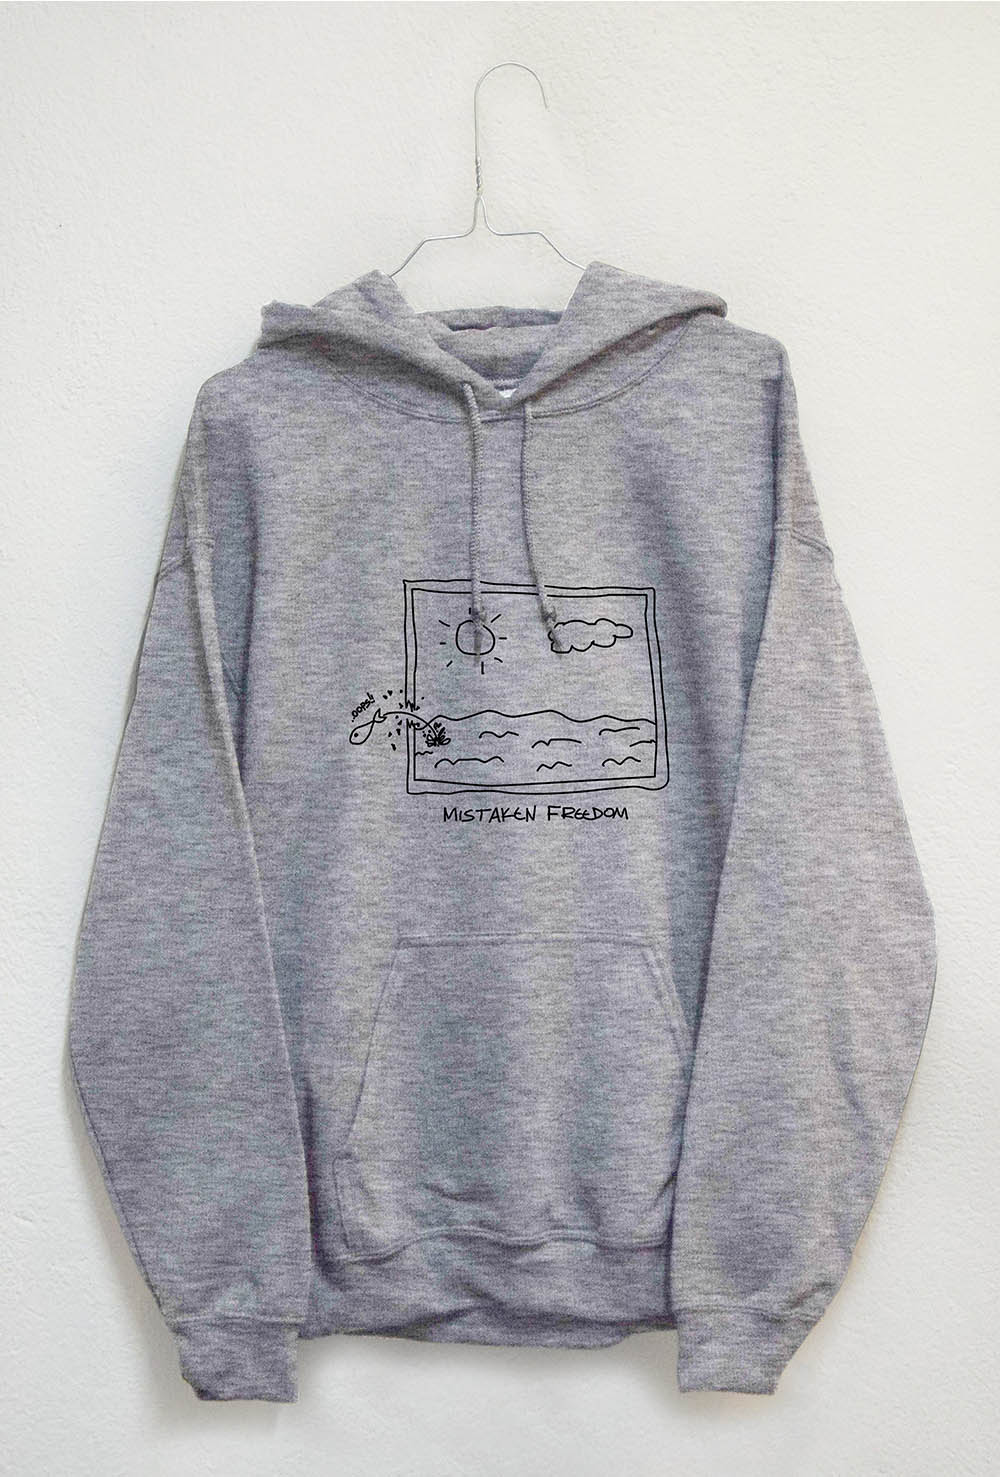 Subworks Grey hoodie with a framed fish..Mistaken Freedom